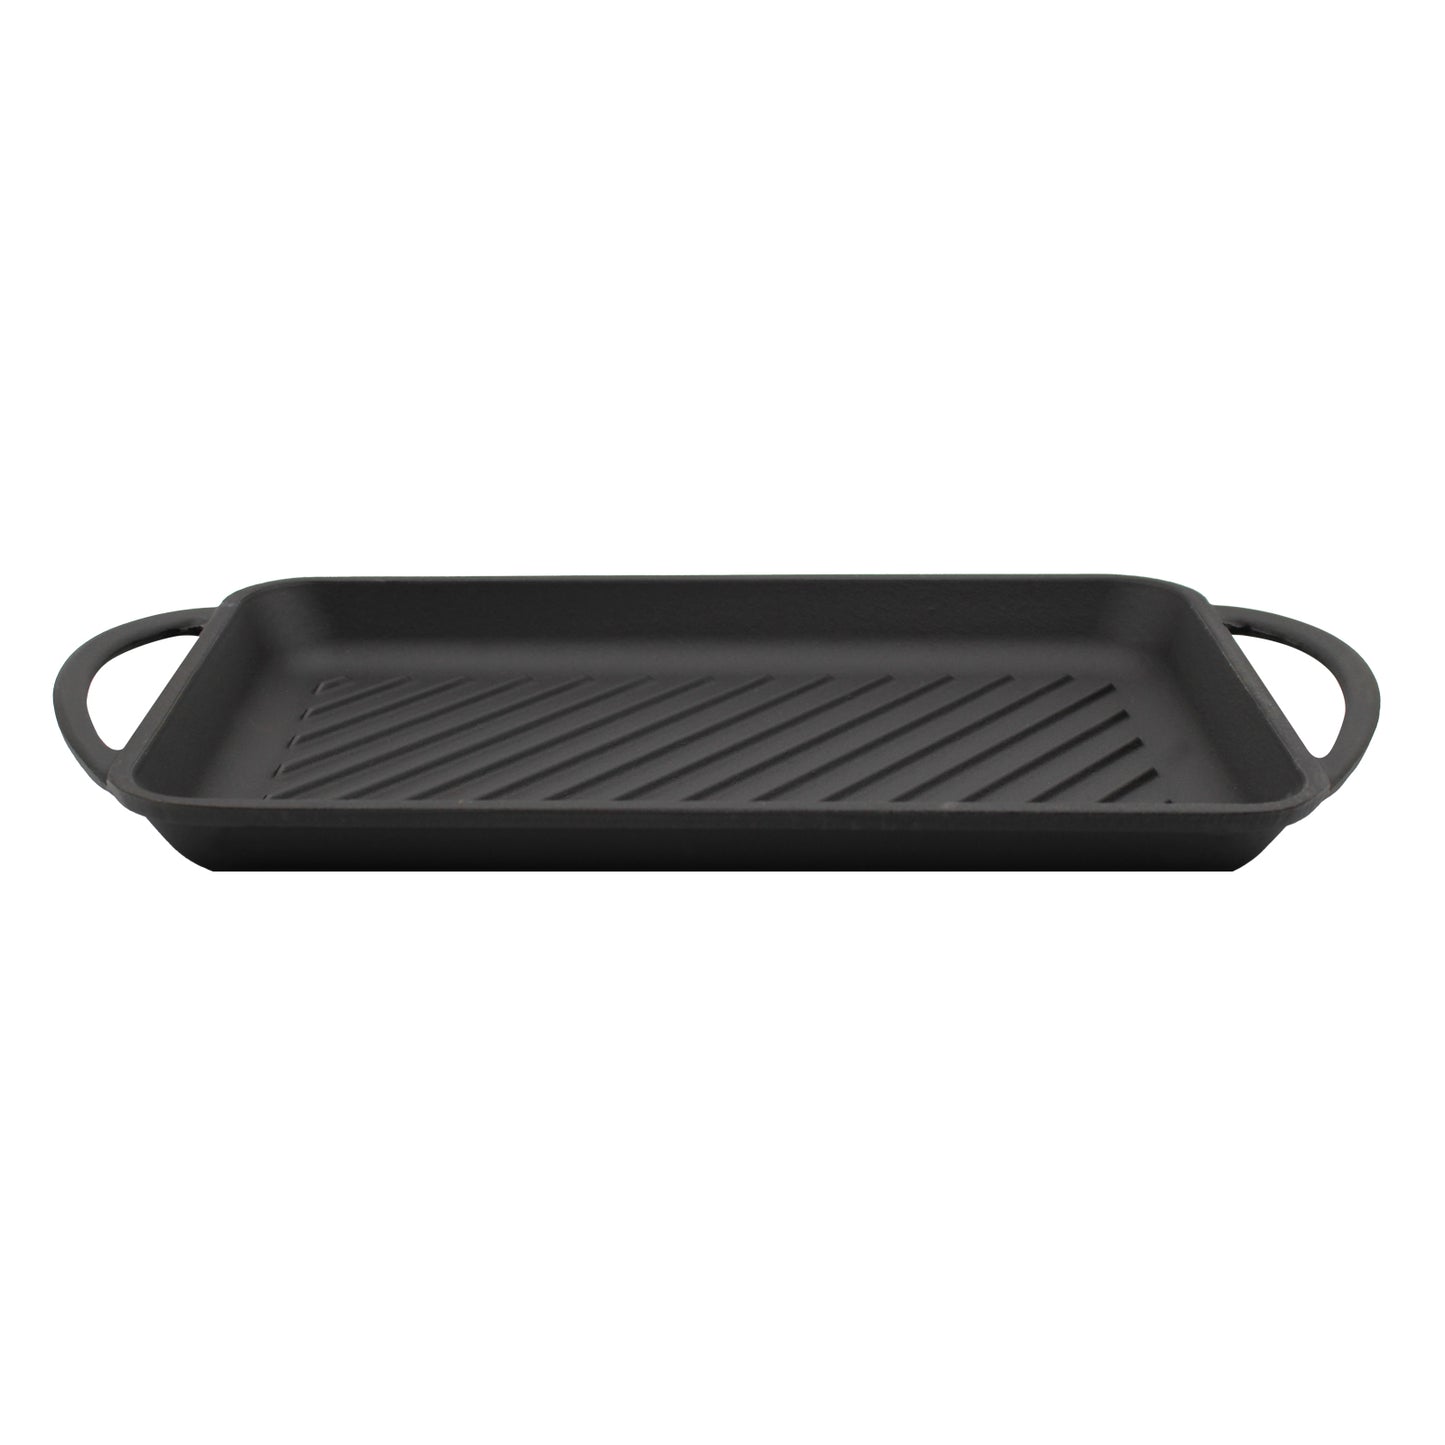 Chef Grill Plate for Braai BBQ Cooking